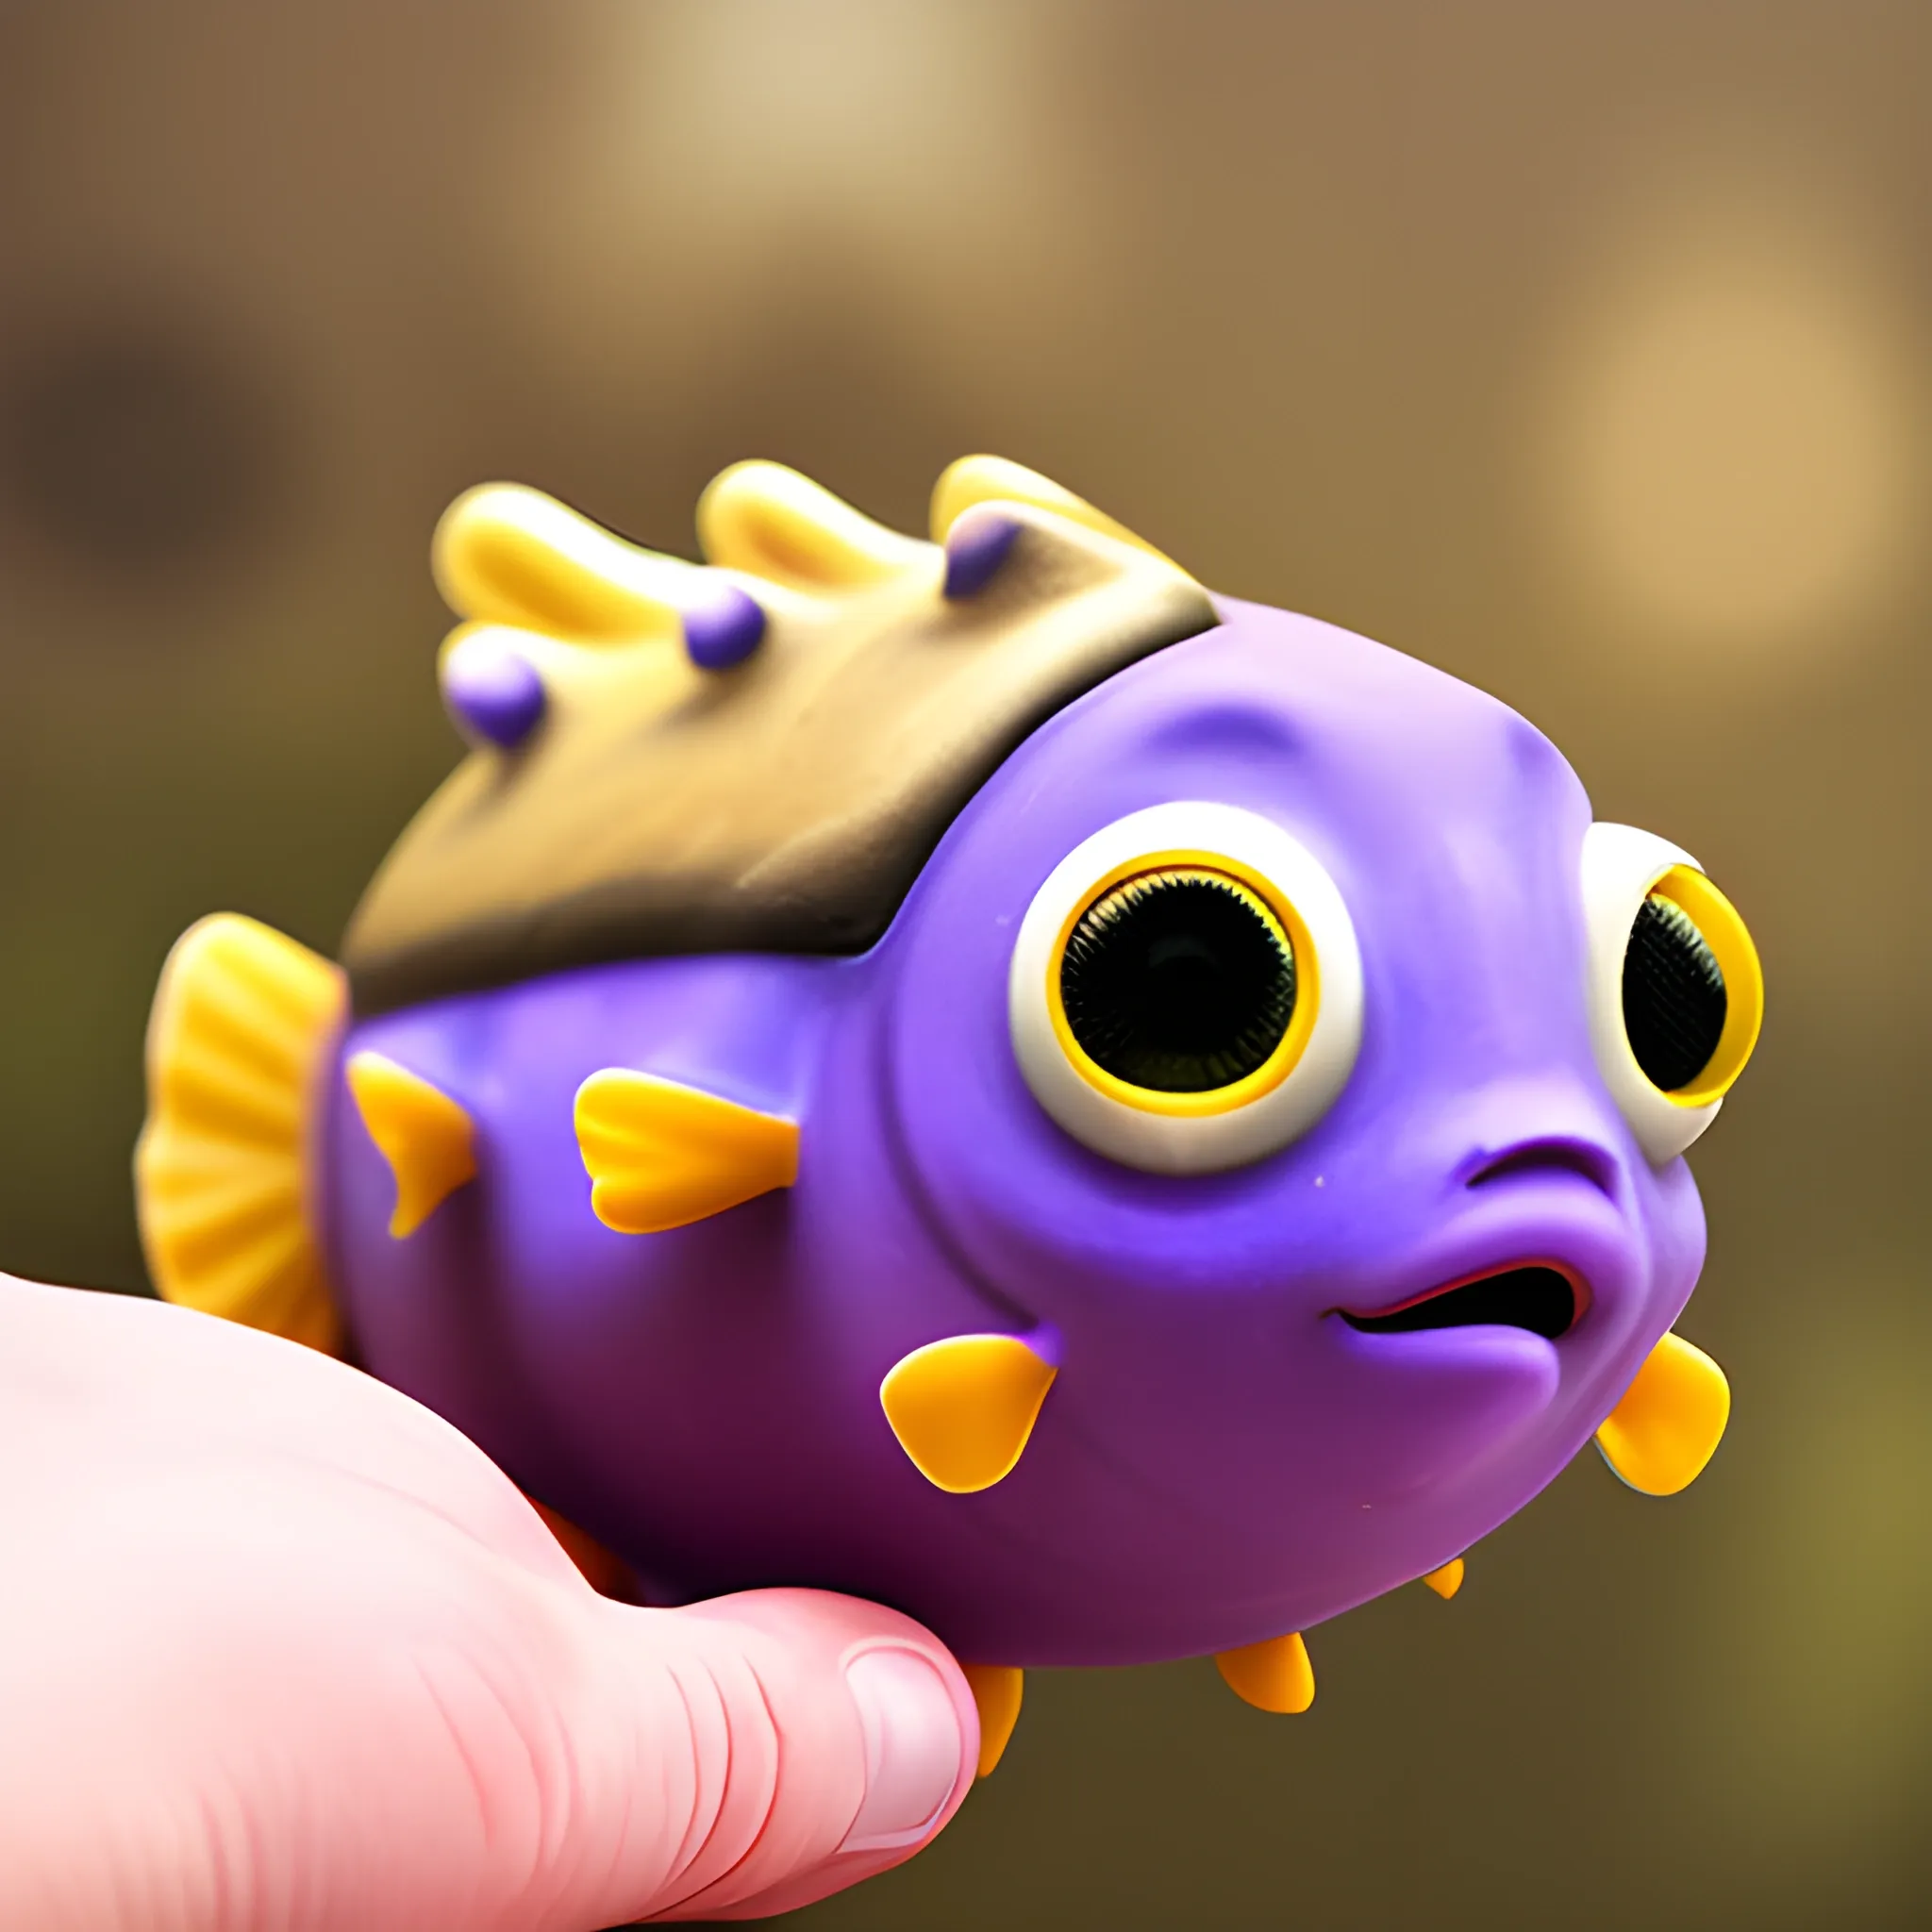 A purple cute puffer fish holding a key in one hand and two eth coins in the other hand